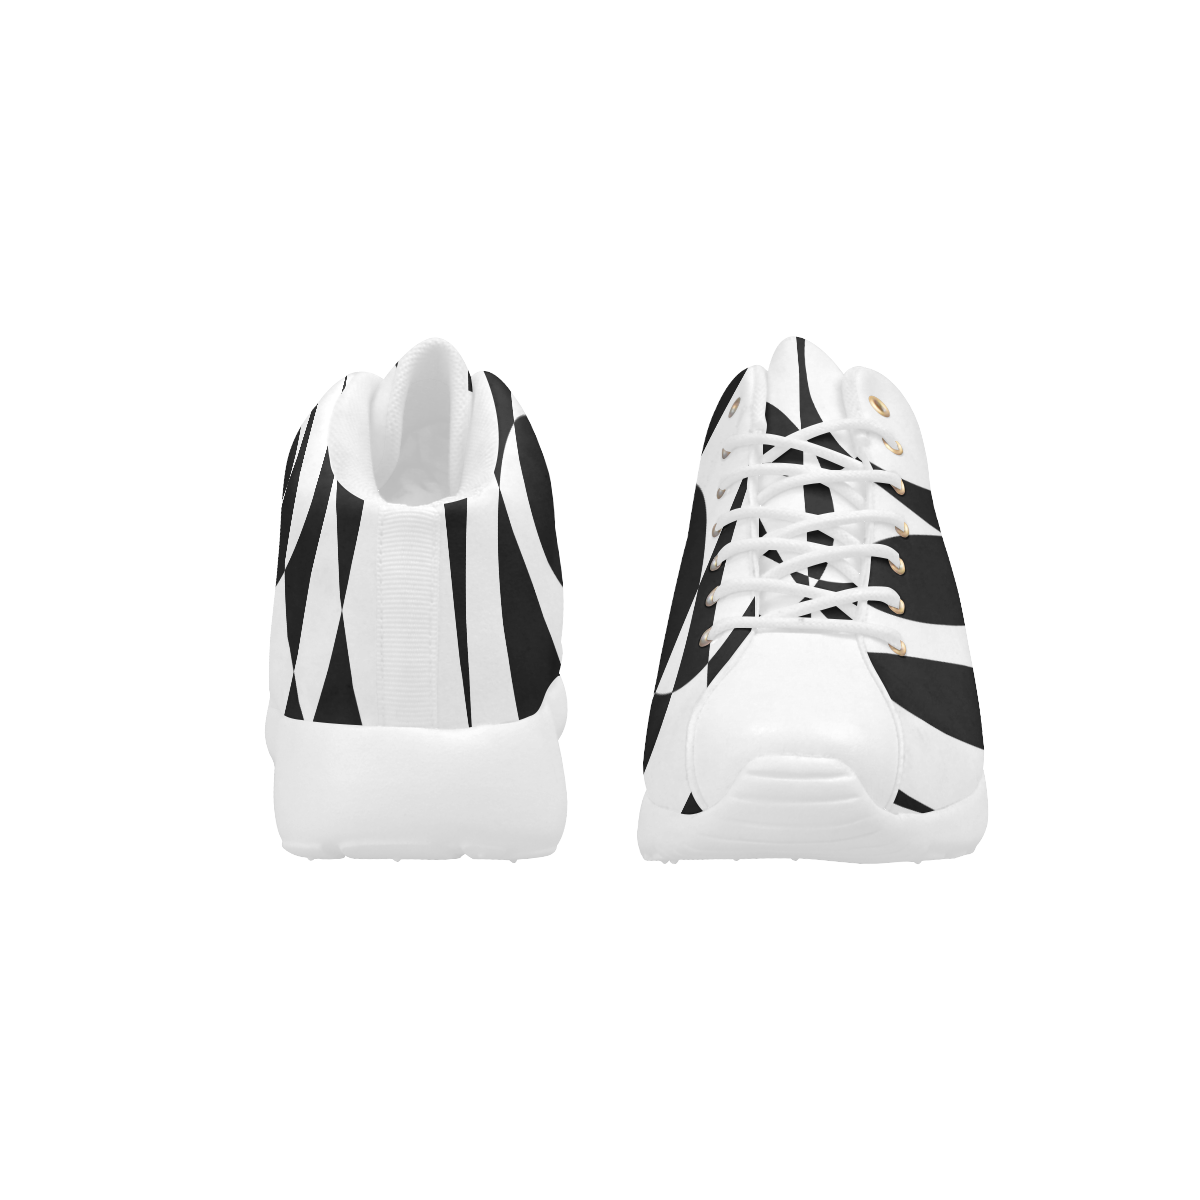 Black and White Retro Abstract by ArtformDesigns Men's Basketball Training Shoes (Model 47502)